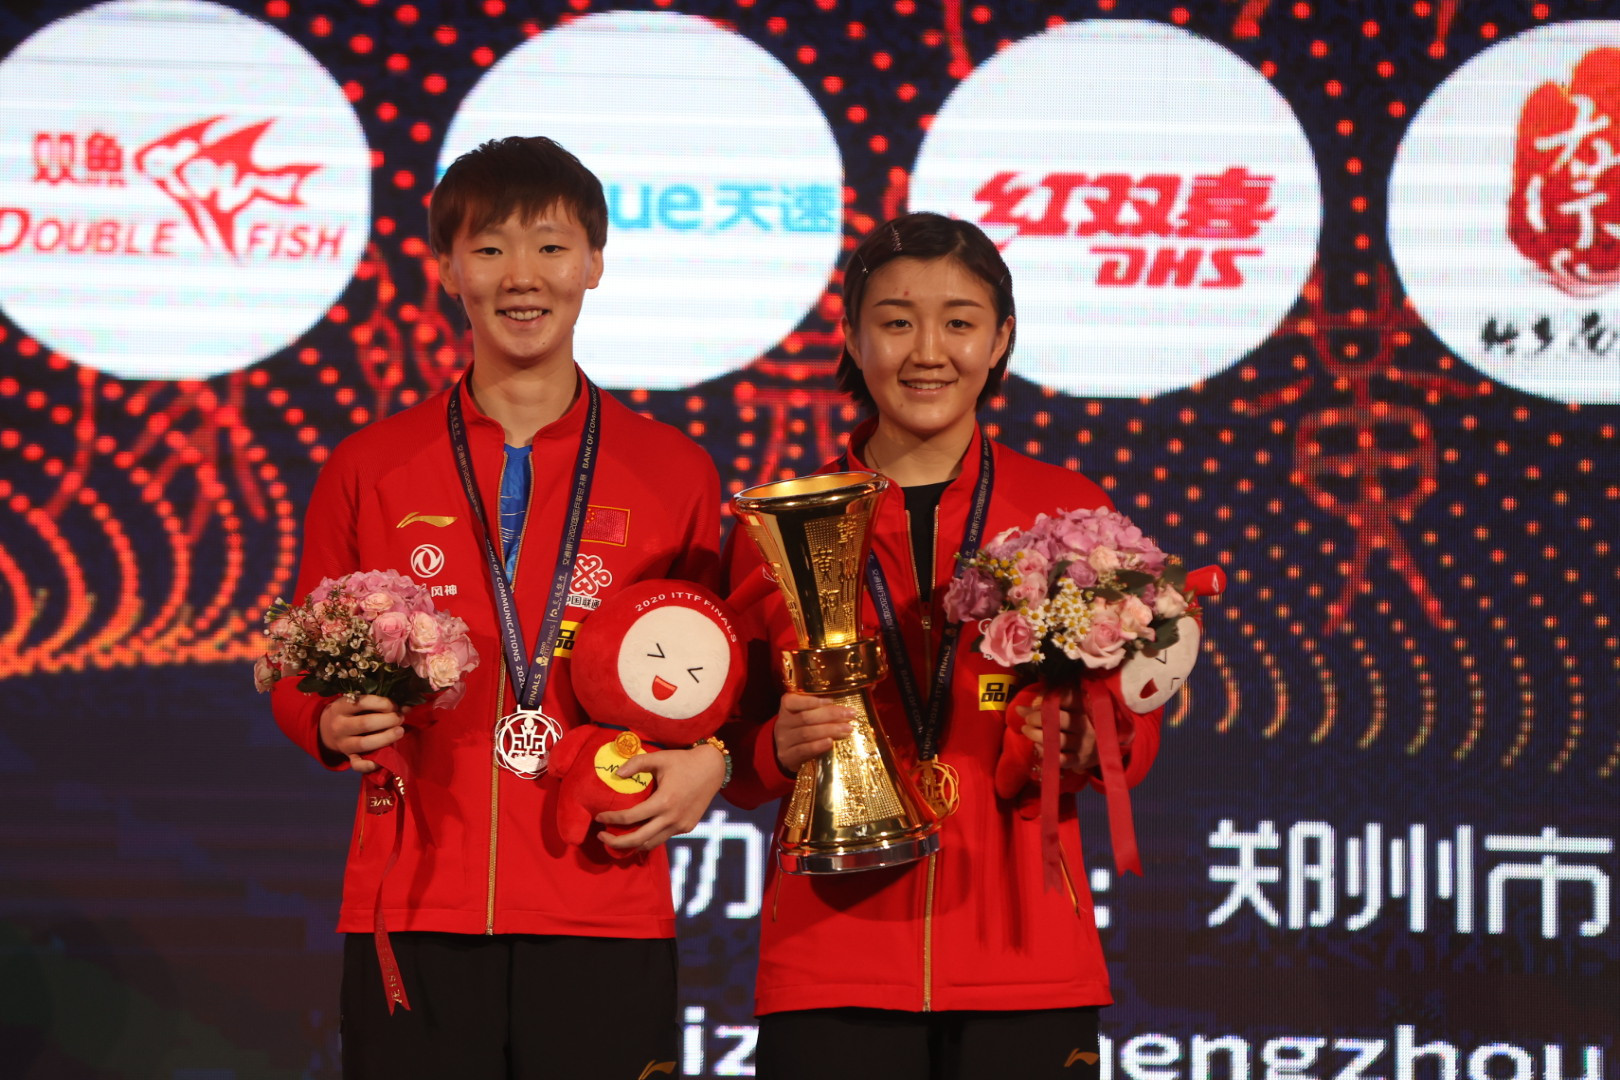 Ma and Chen set new records with victories at ITTF Finals